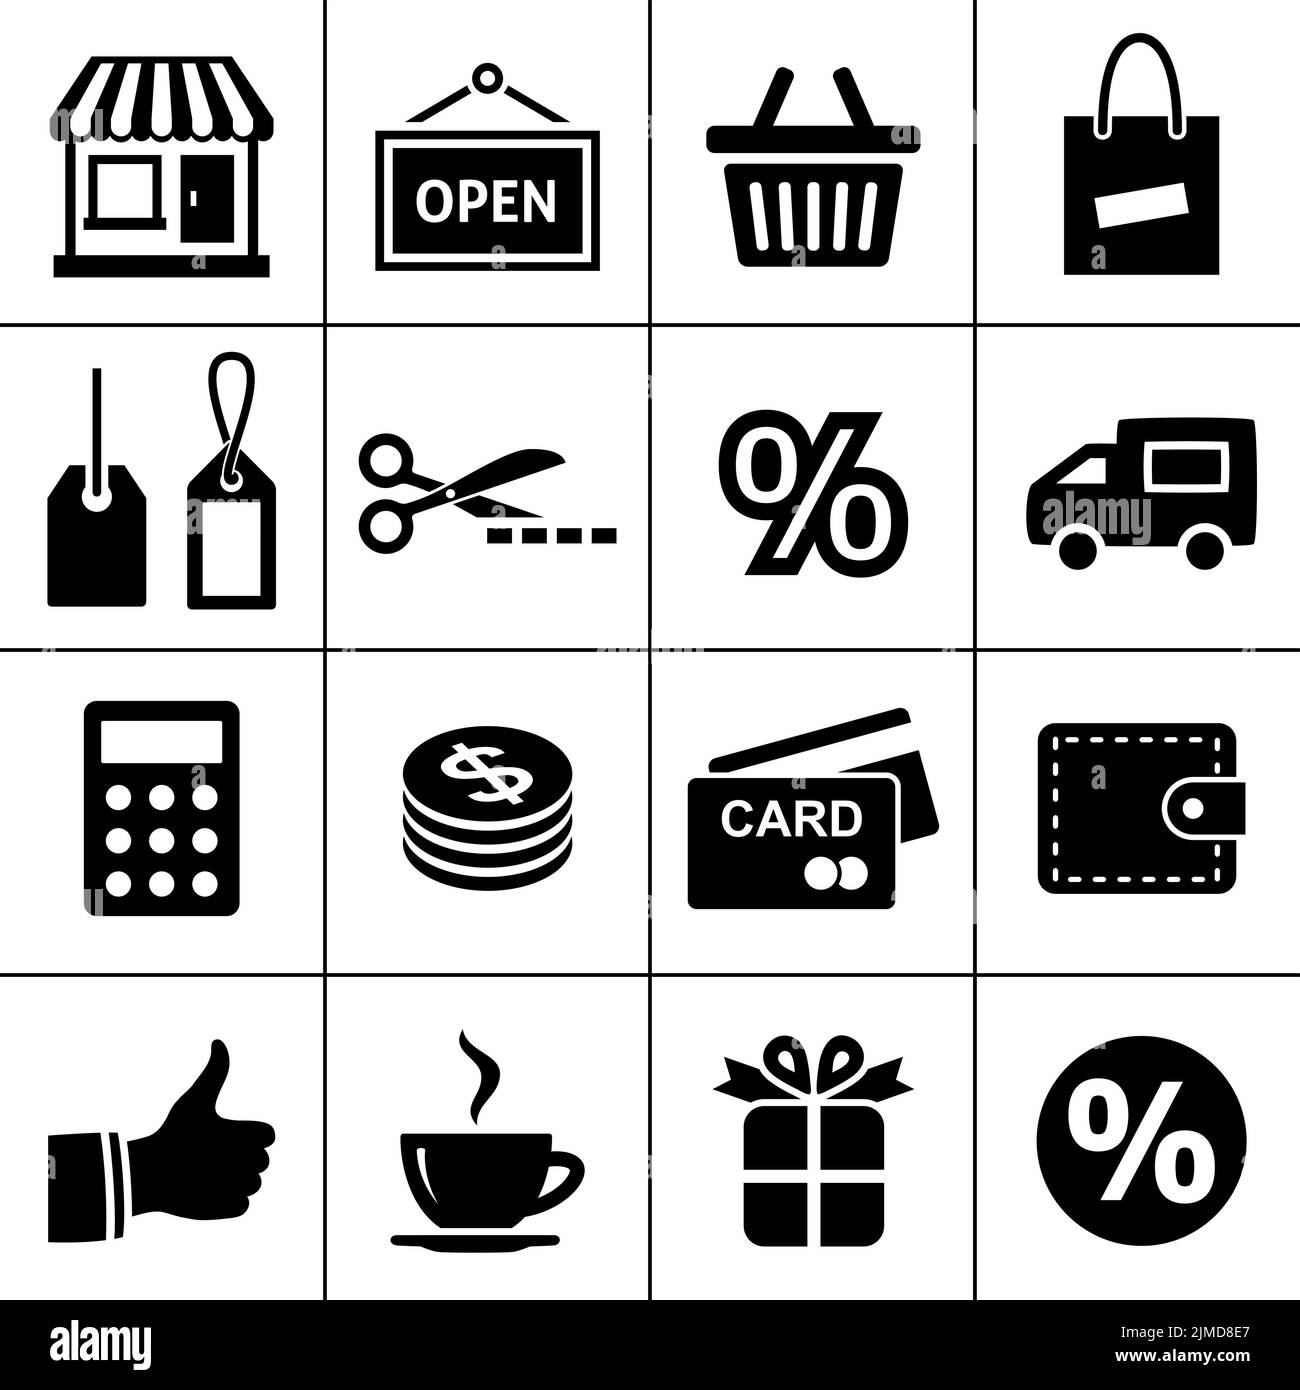 Shopping business and marketing icons button set vector graphics for web and mobile apps include shop, calculator, money, tags Stock Vector